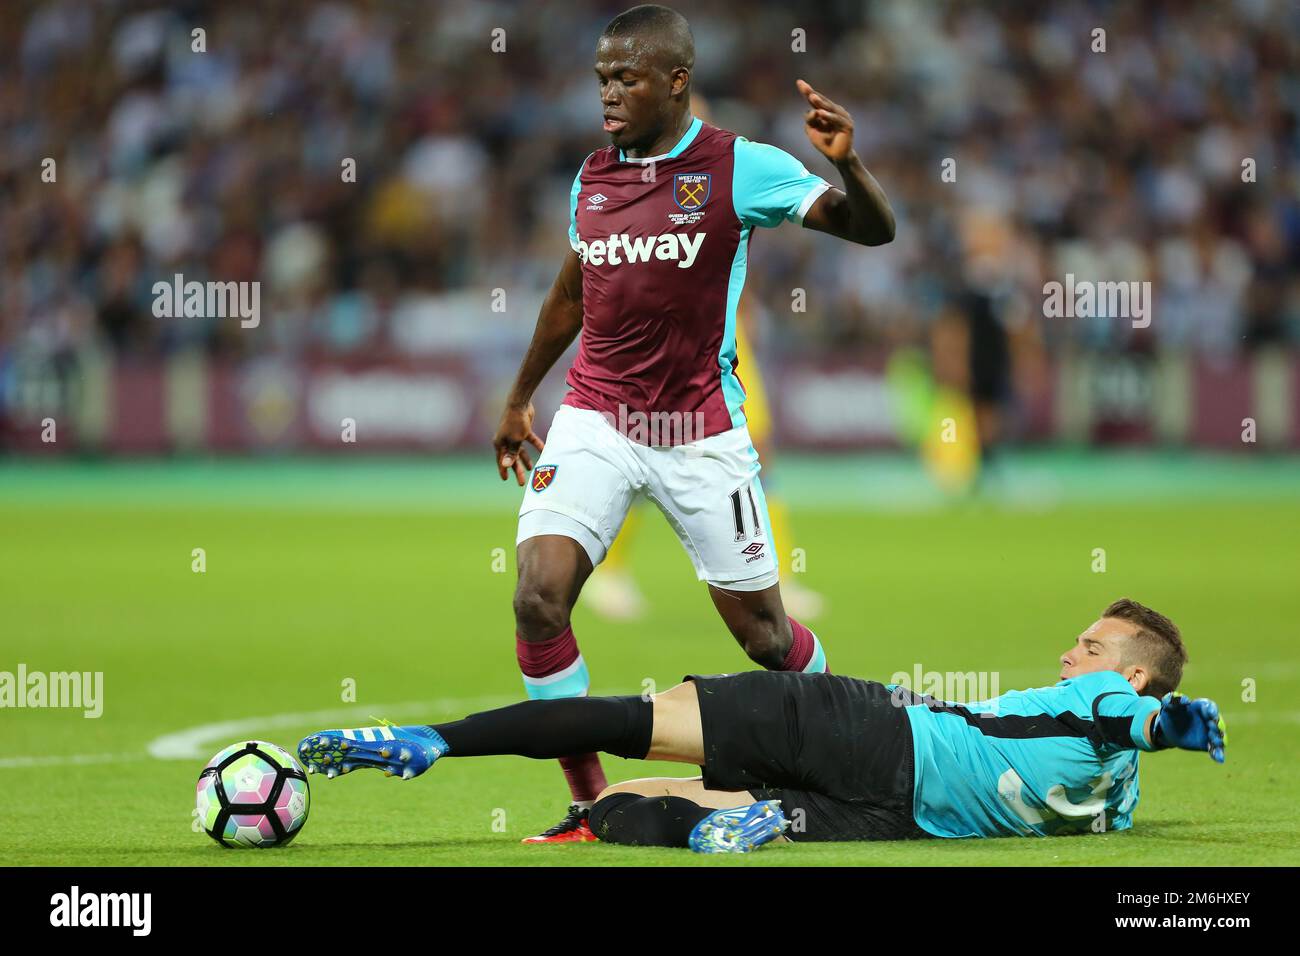 Axel Maraval of NK Domzale pokes the ball away from Enner Valencia of West Ham United - West Ham United v NK Domzale, UEFA Europa League second leg third round qualifier, The London Stadium, Stratford, London - 06 August 2016.Picture by Richard Calver Stock Photo